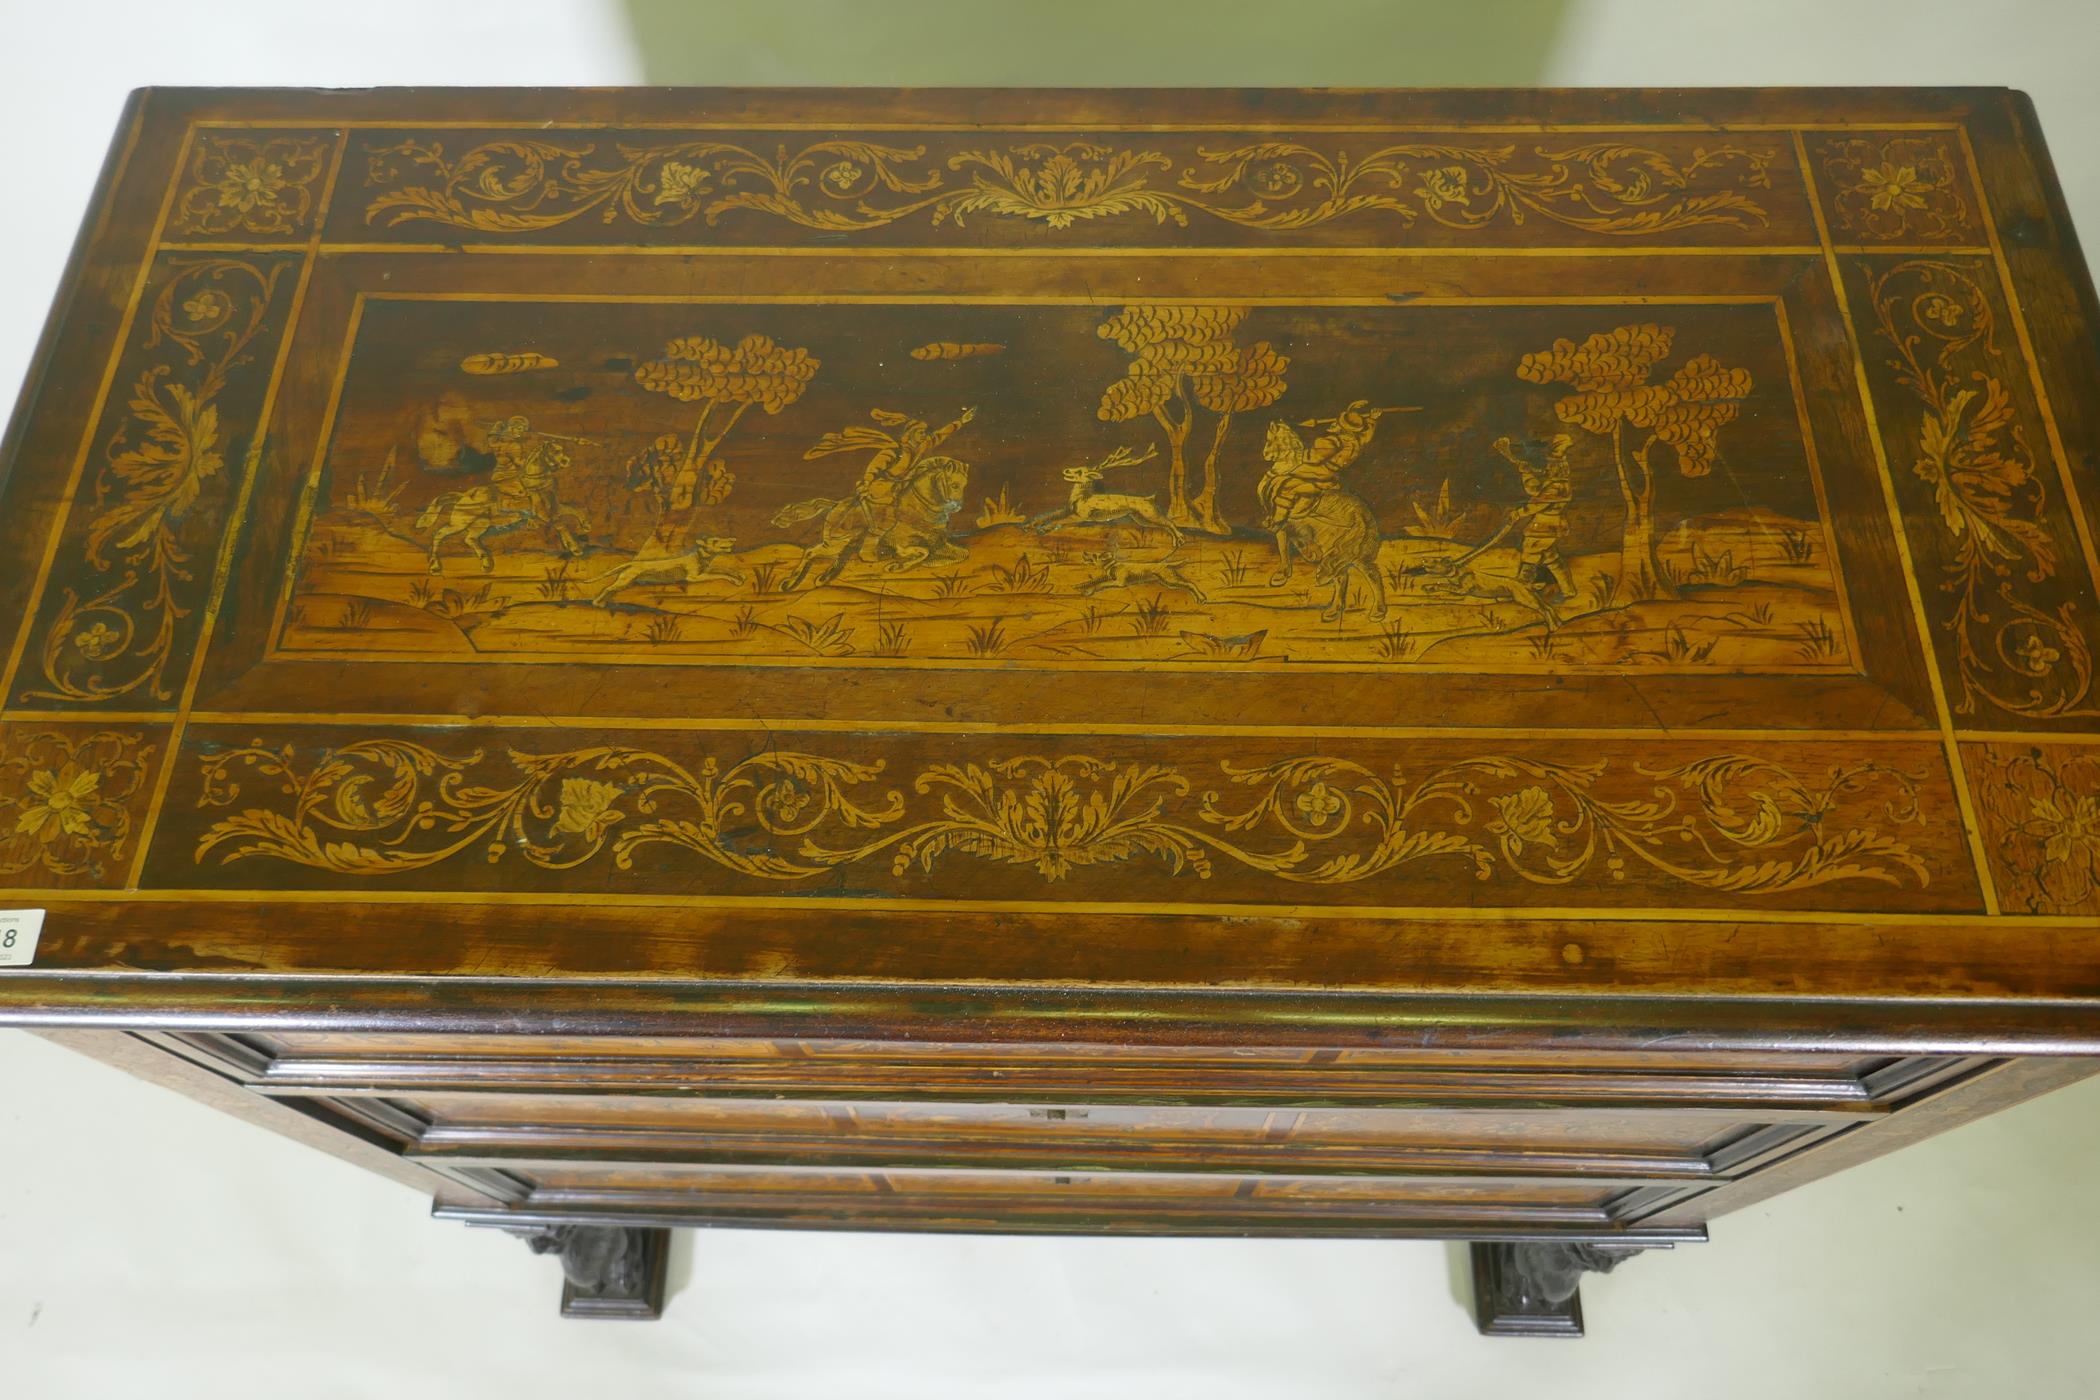 C18th/C19th Italian/Swiss marquetry inlaid walnut chest of three drawers, inlaid with hunting - Image 3 of 10